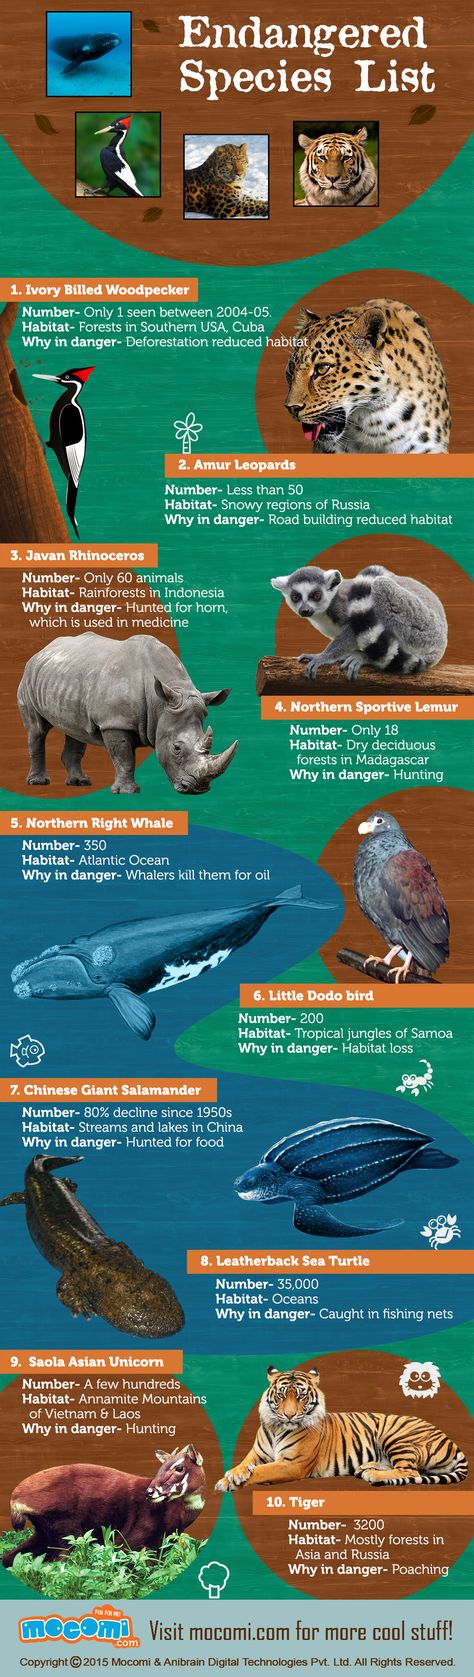 Read all about the World's Top 10 #EndangeredSpecies - Ivory Billed Woodpecker, Amur Leopards, Javan Rhinoceros, Northern Sportive Lemur, Northern Right Whale, Little Dodo bird, Saola Asian Unicorn, Leatherback Sea Turtle, Chinese Giant Salamander and Tiger. Nature, Endangered Animals Poster, Endangered Species Poster, Endangered Species Activities, Ivory Billed Woodpecker, Endangered Species Photography, Endangered Species Project, Endangered Animals Project, Species Poster